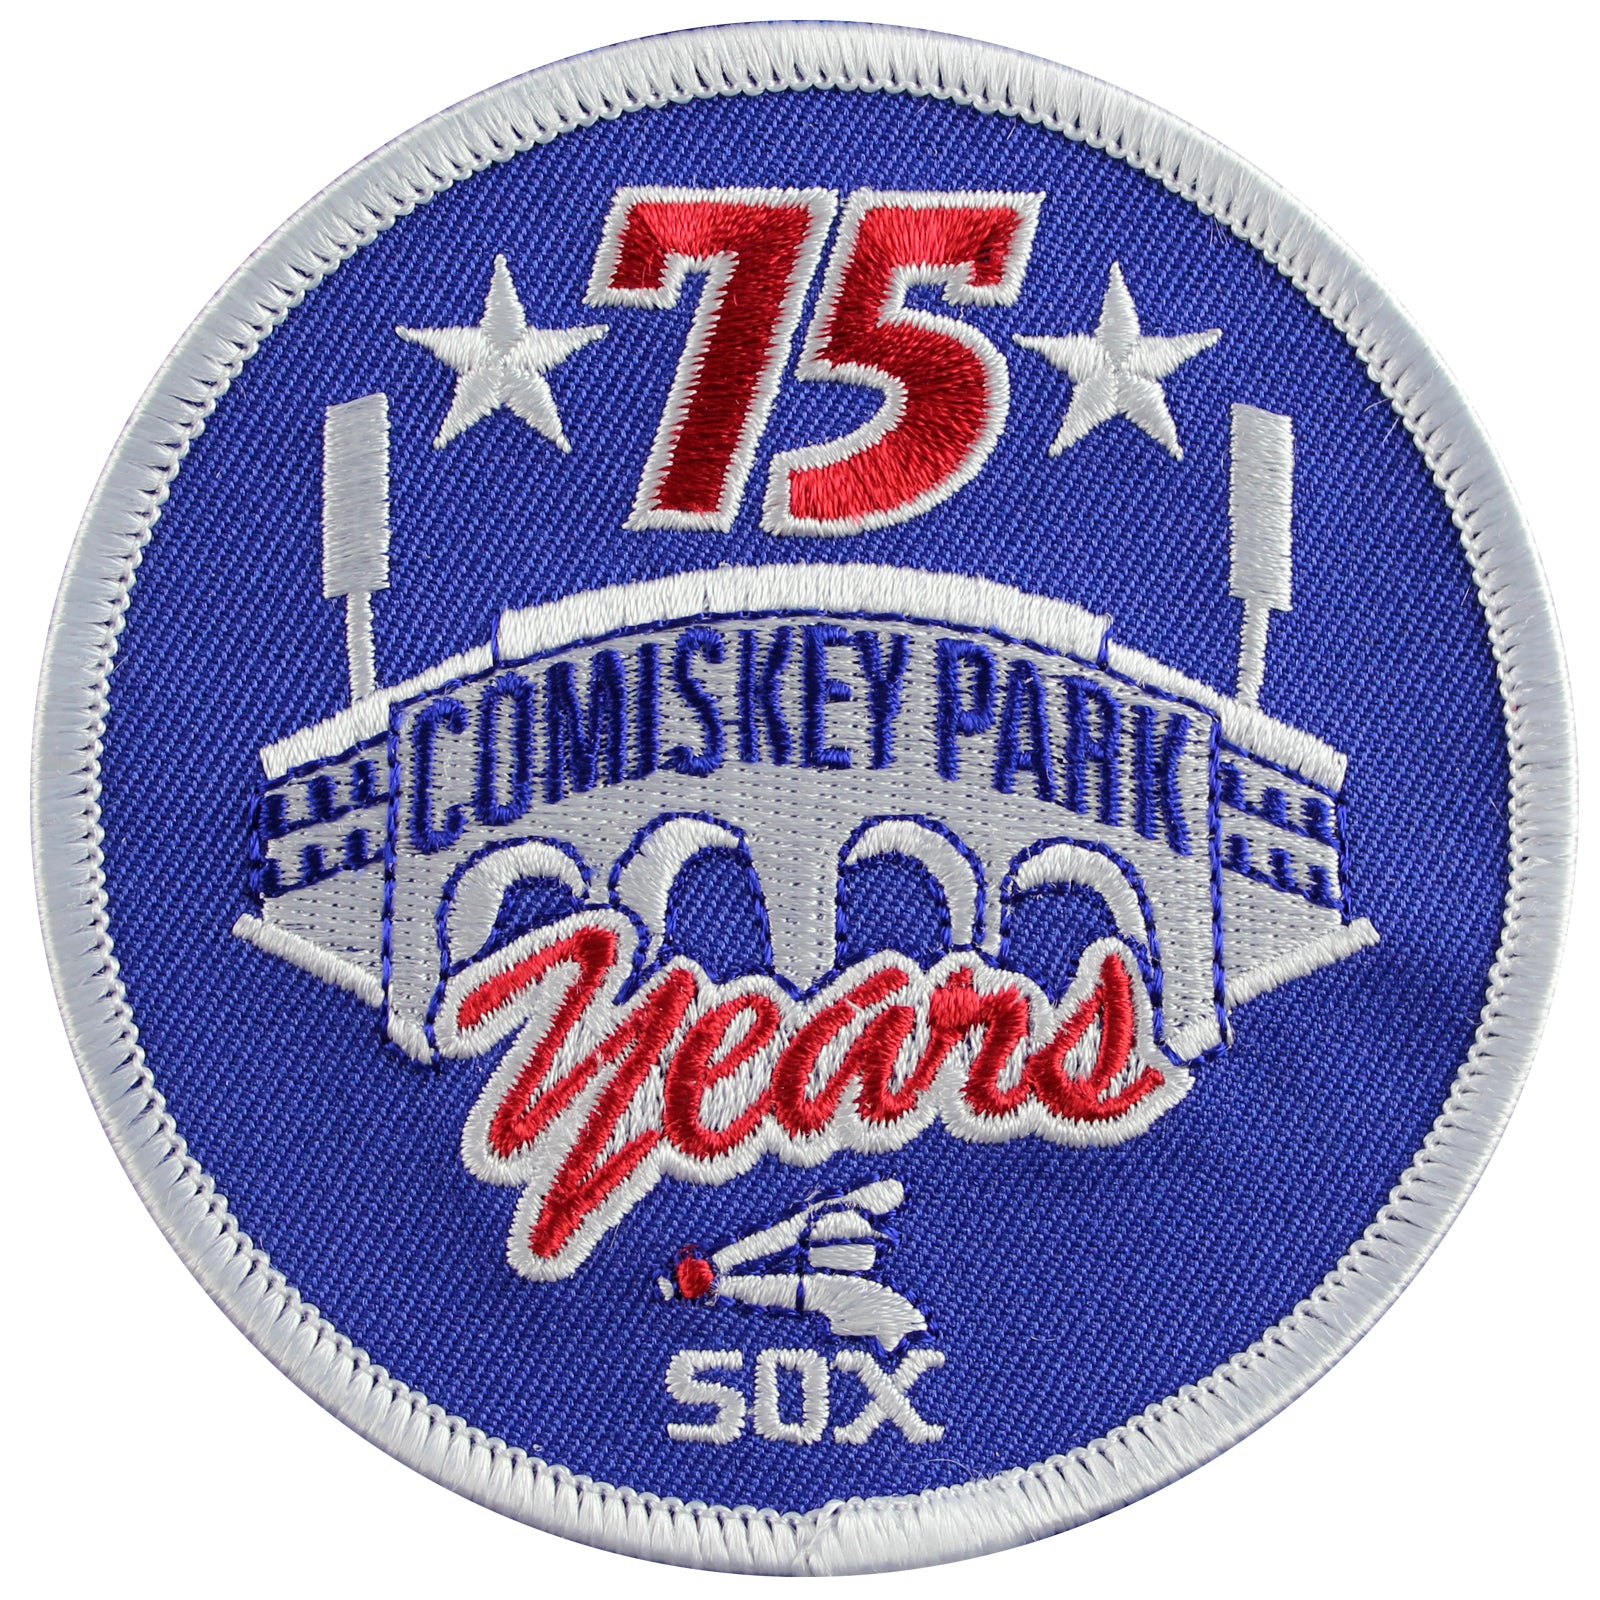 Chicago White Sox vintage baseball patch 1980s – Fastball Collectibles